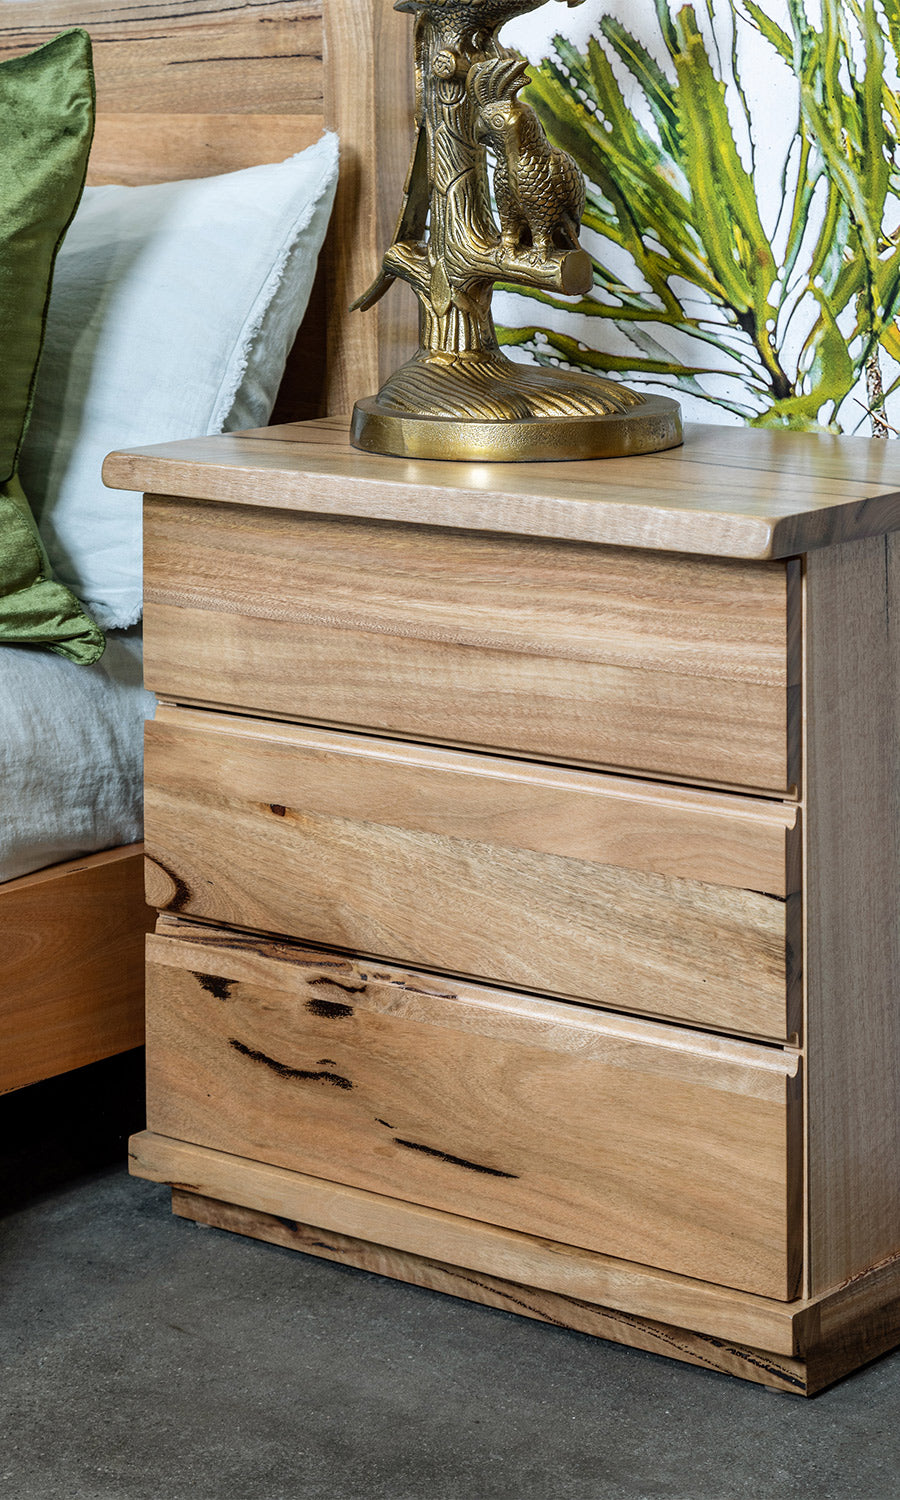 Naturaliste Natural Edge Solid Marri Timber Wood Three Drawer Bedside Tables Bedroom Suite Made in Perth WA